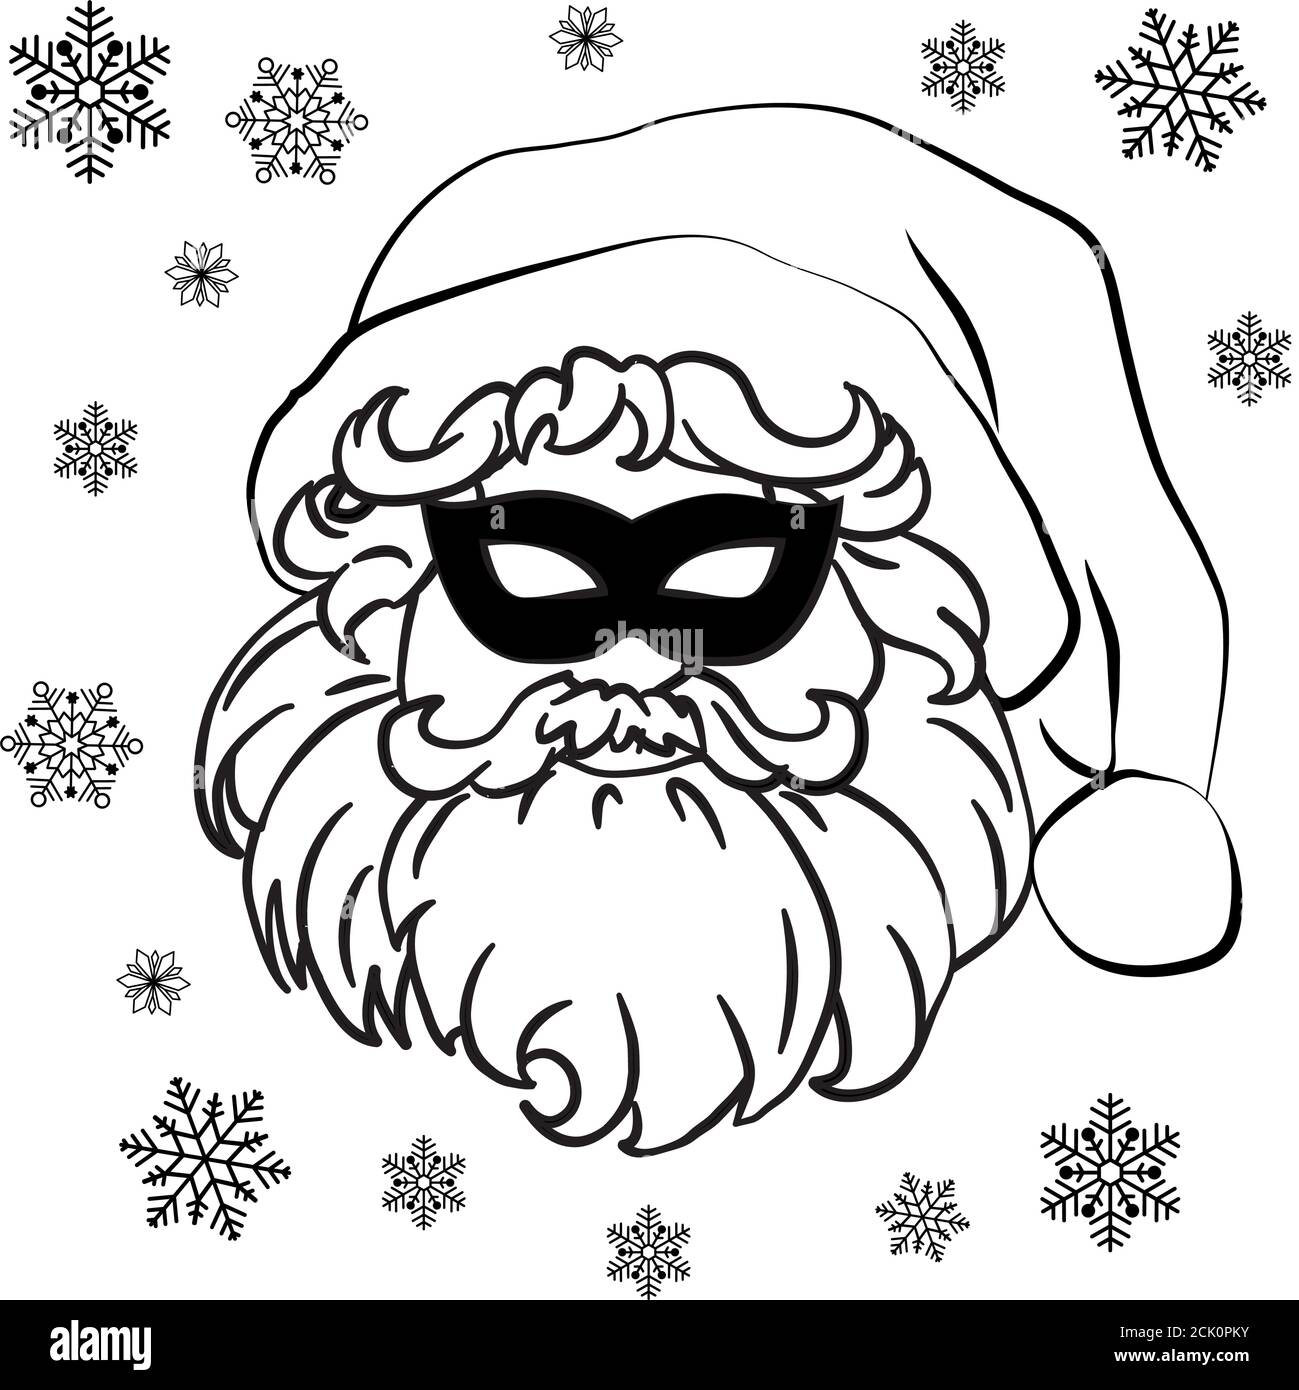 70+ Best Santa Templates Shapes, Crafts & Colouring Pages